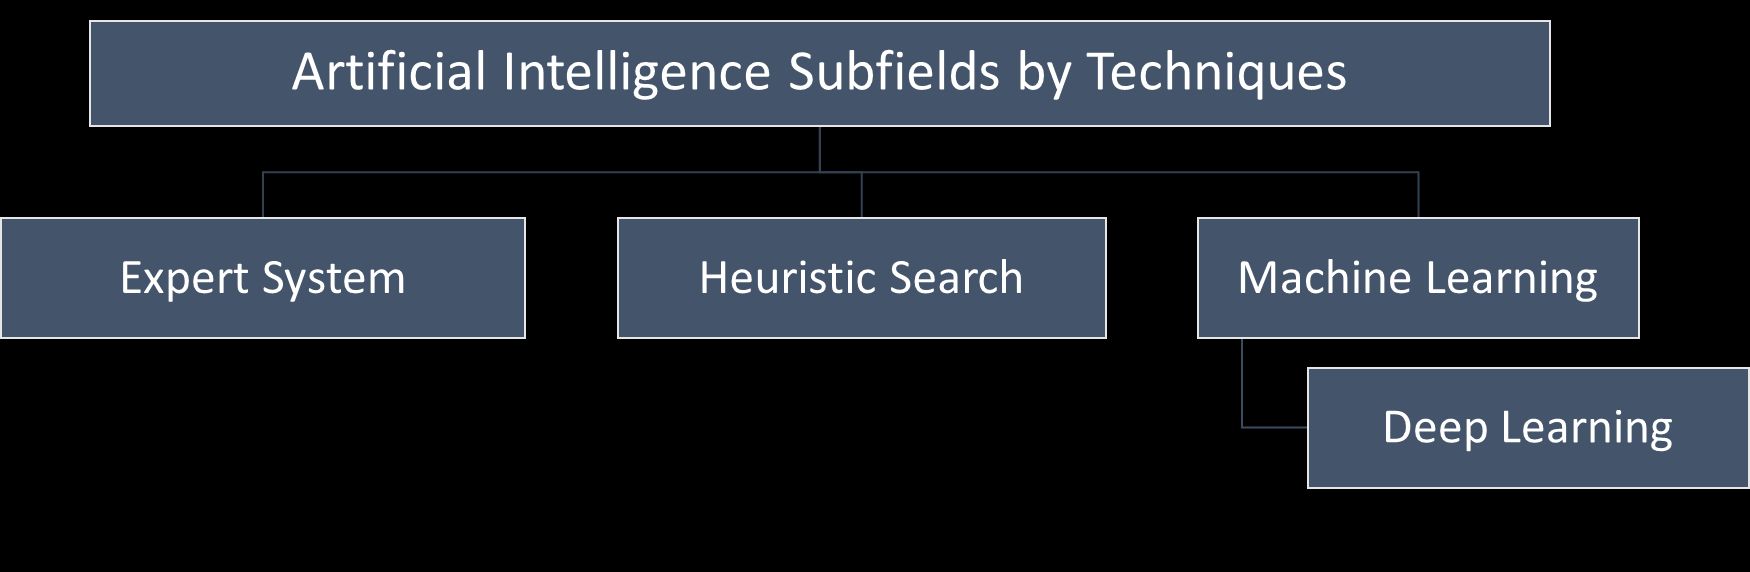 Categories of AI based on techniques: expert system, heuristic search, and machine learning. Note that deep learning is a subfield of machine learning techniques with more complexity. 